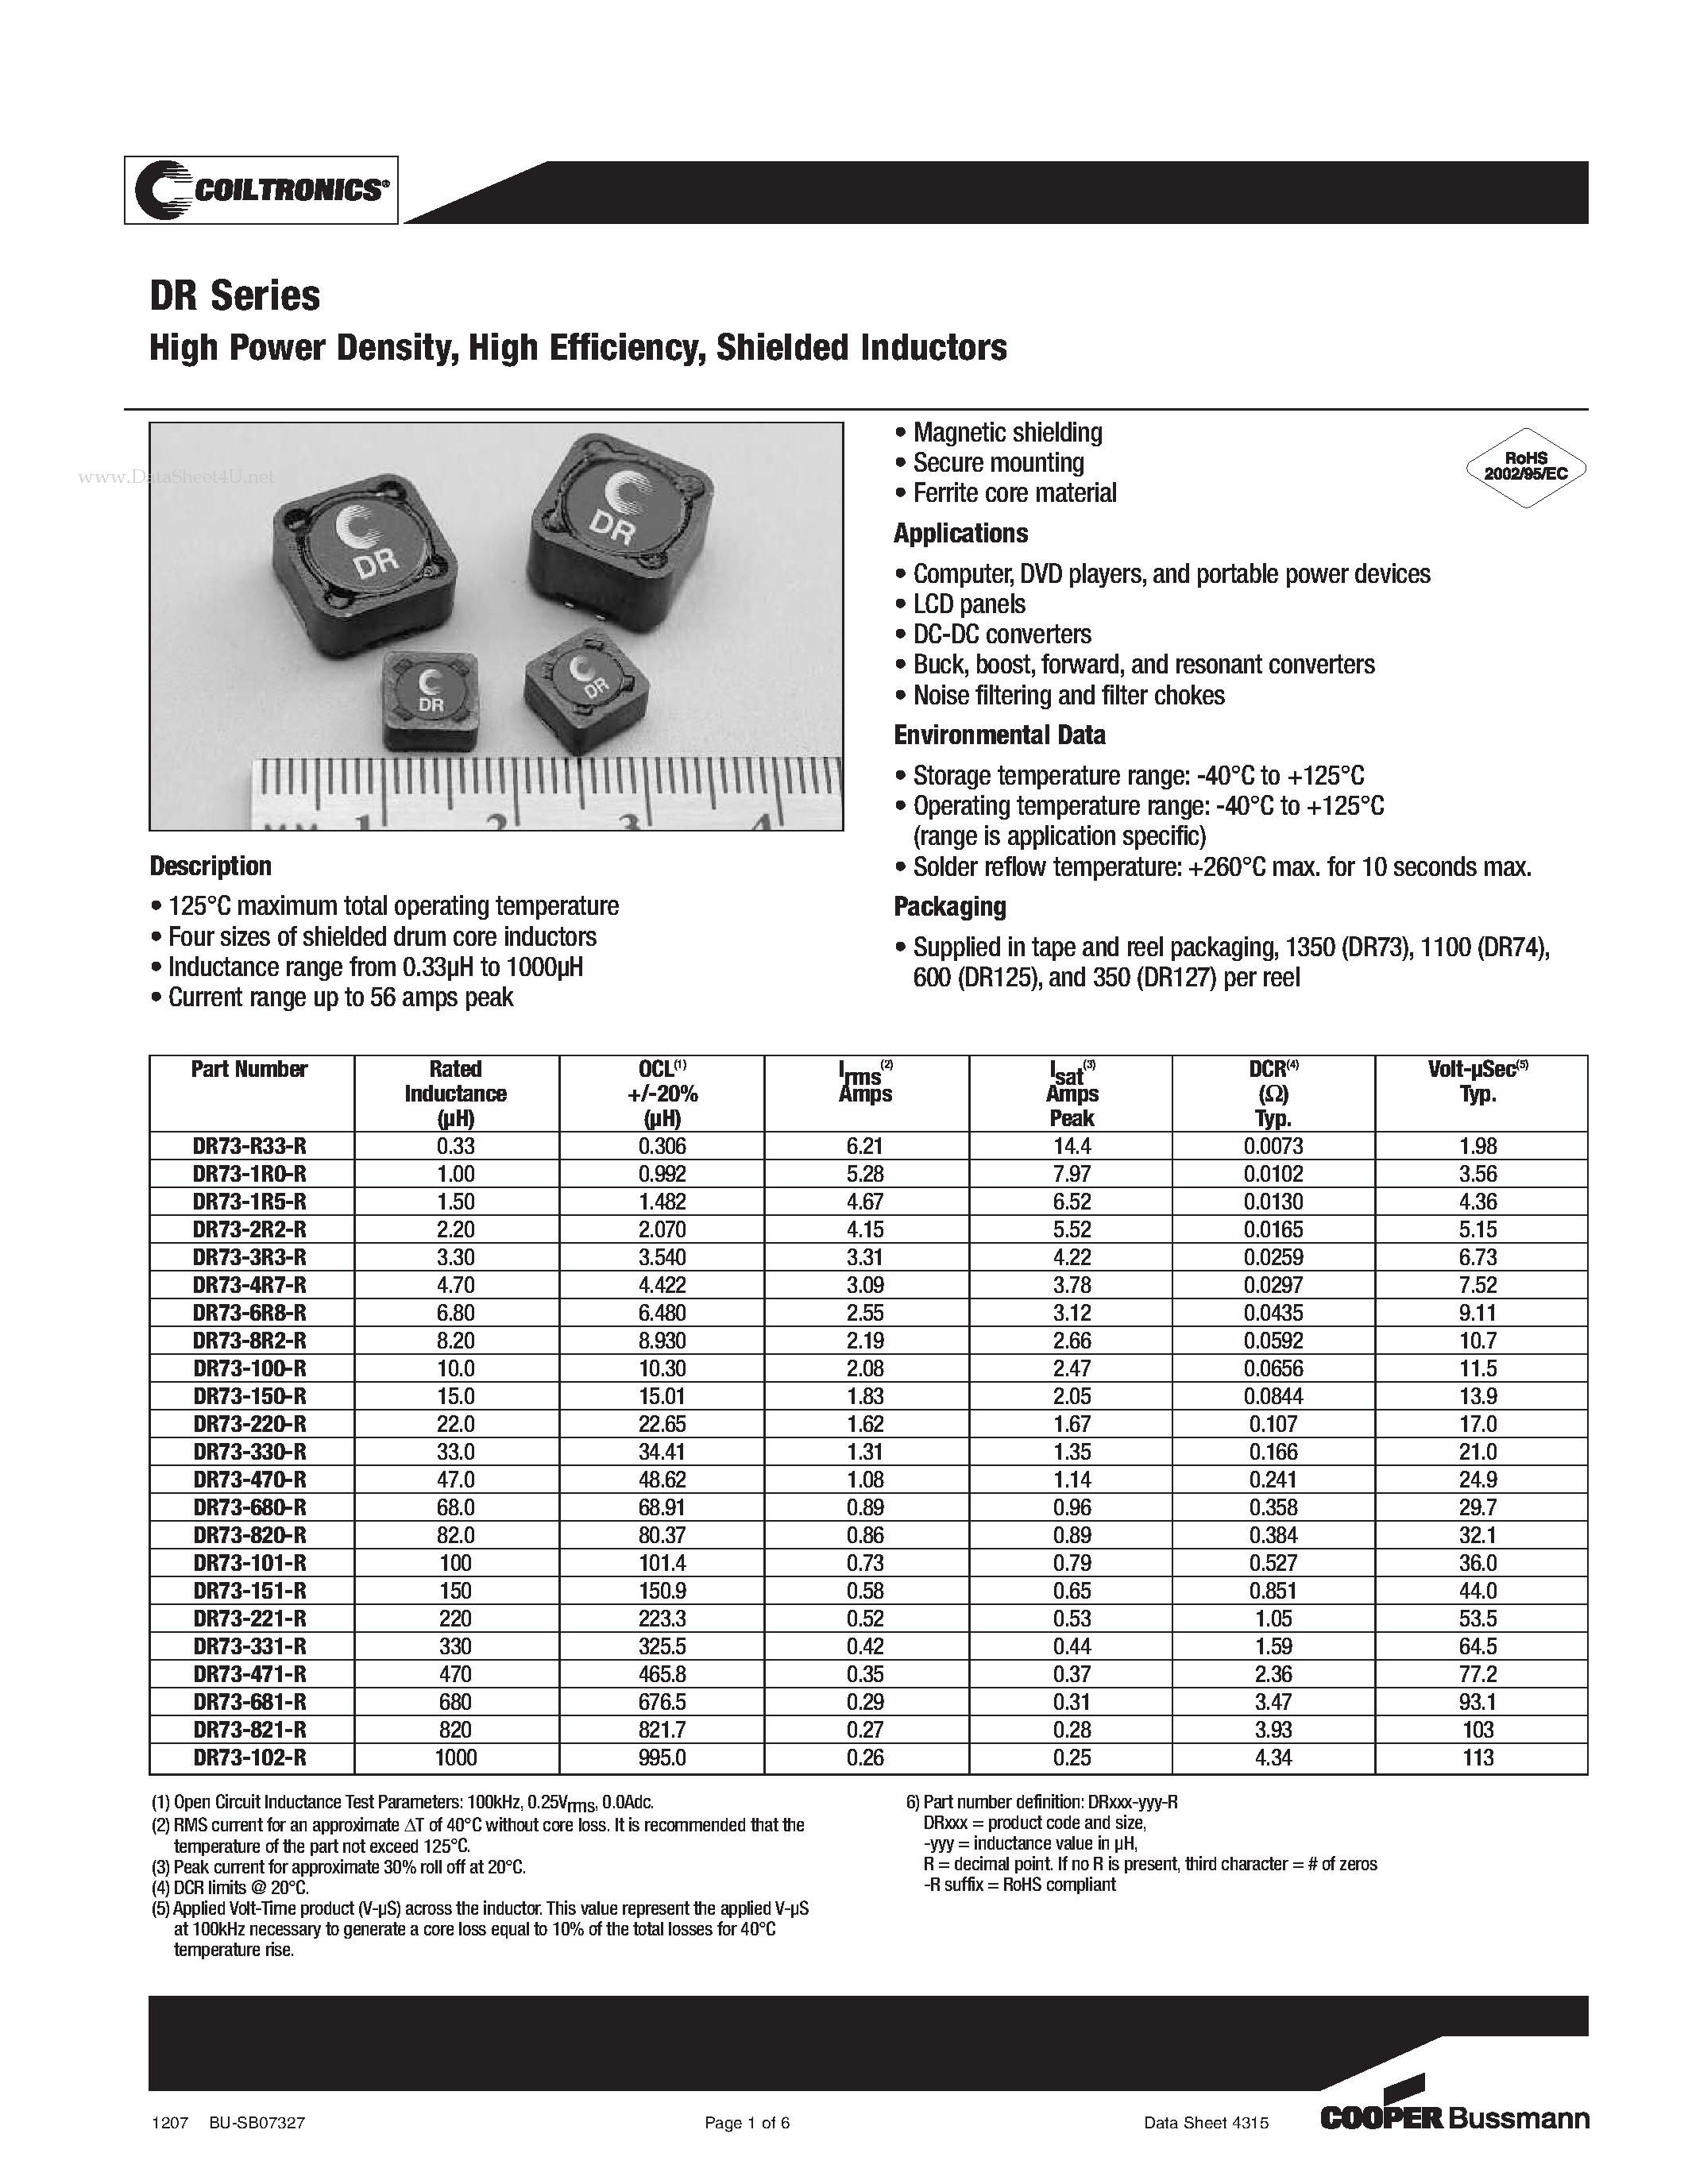 Datasheet DR73-100-R - Shielded Inductors page 1